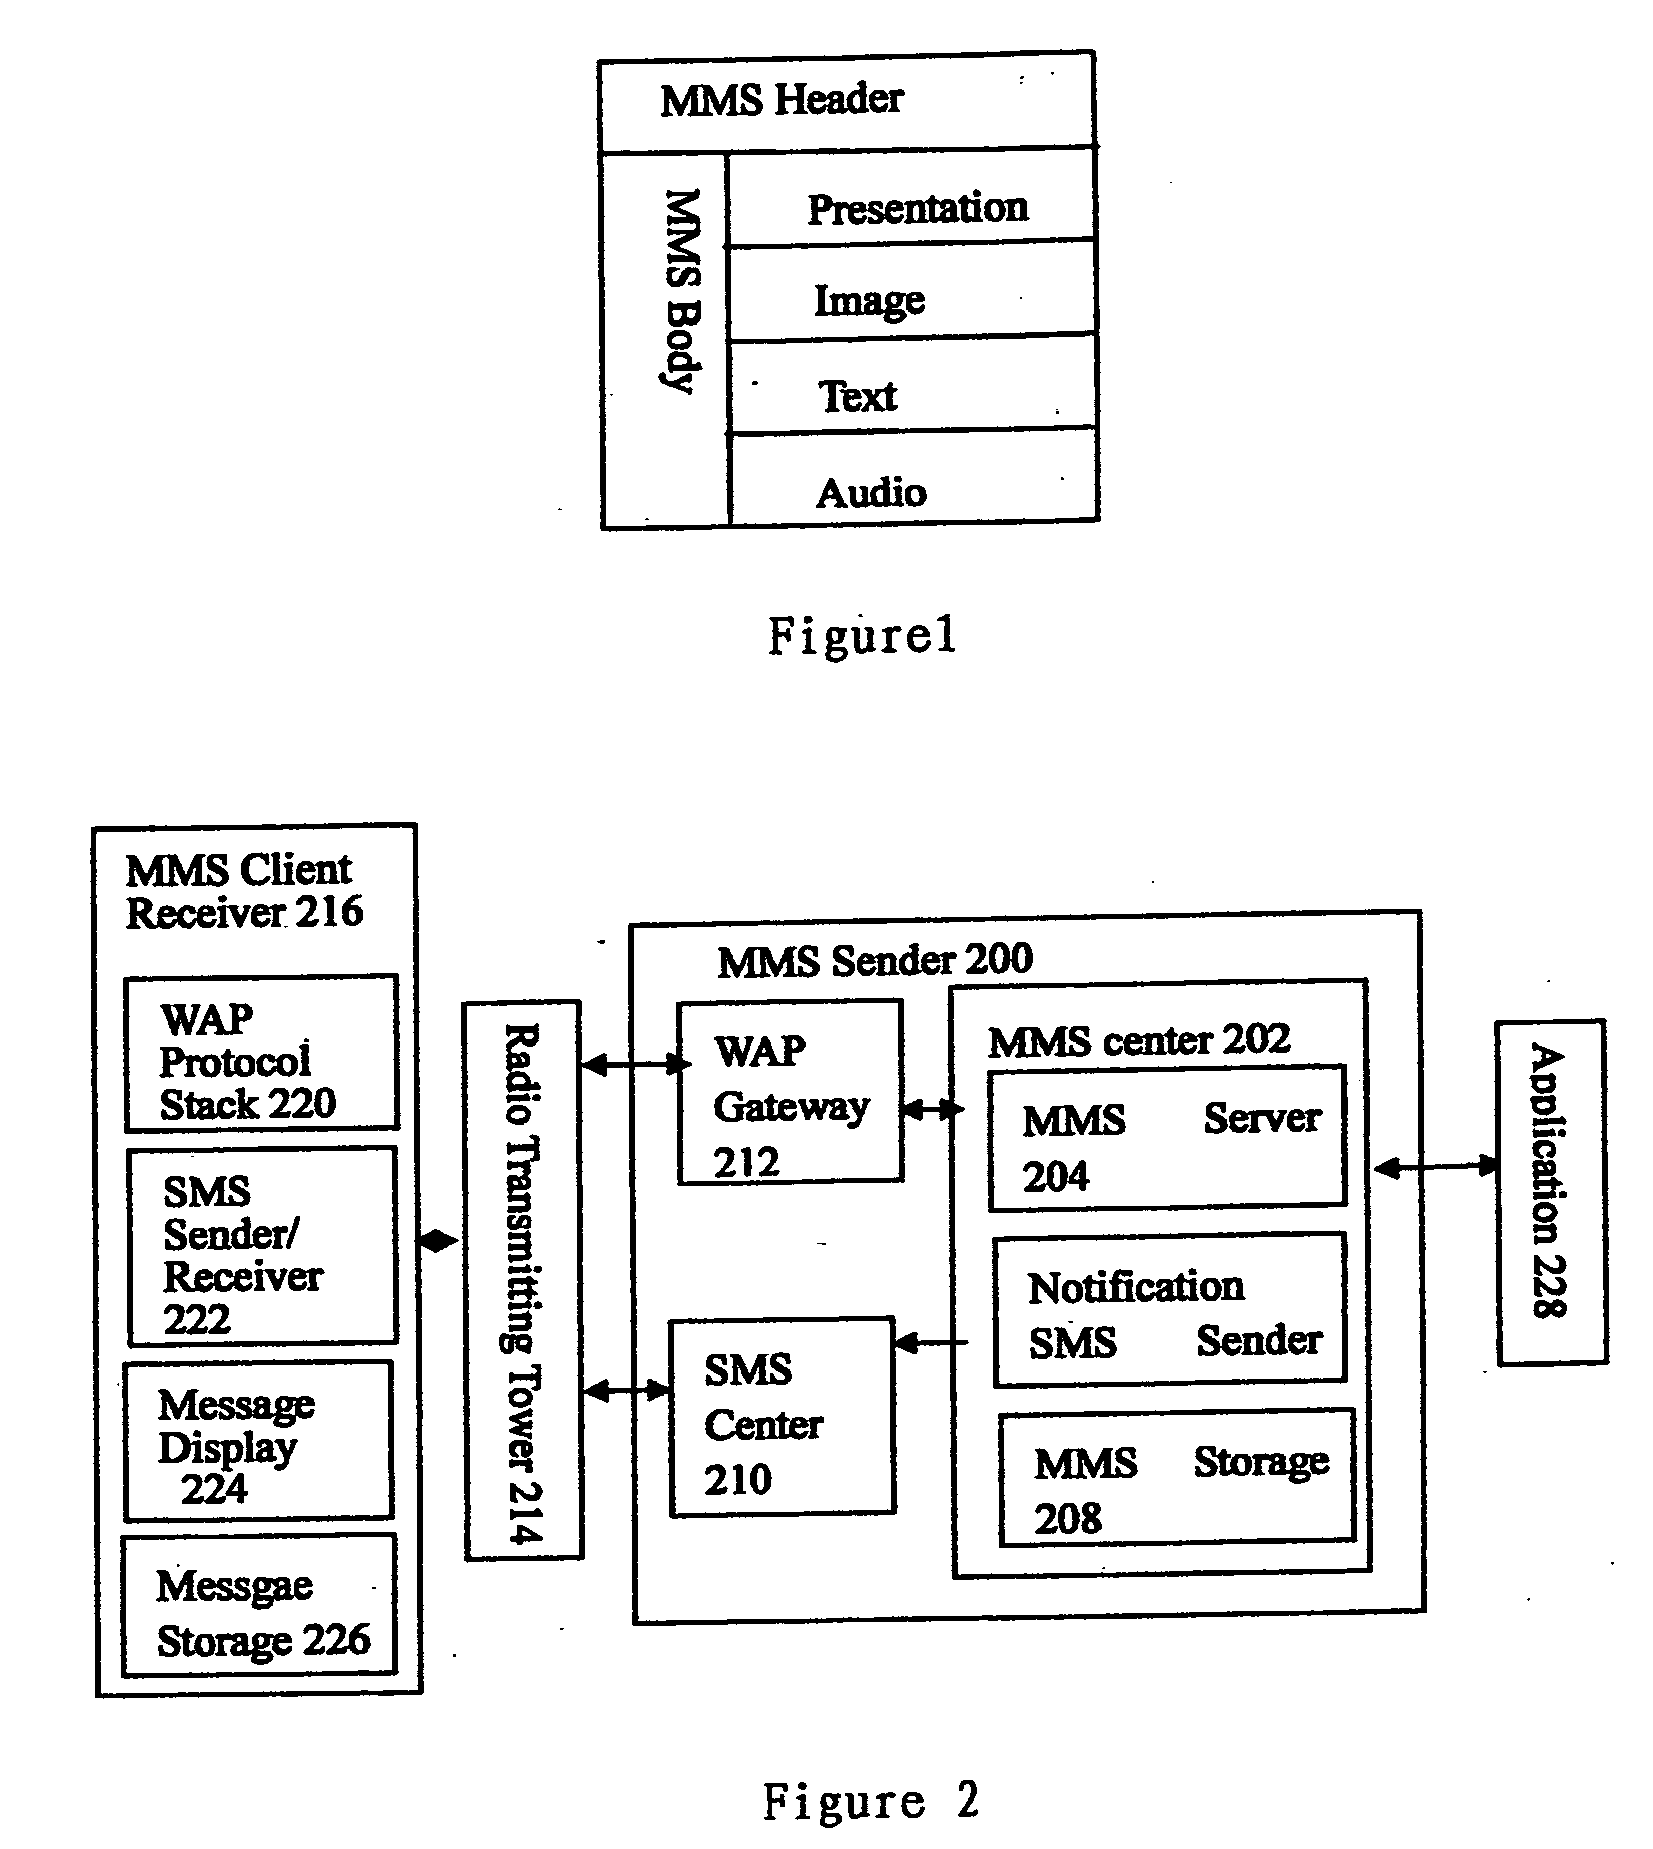 Apparatus, method and system of sending and receiving for supporting application-based MMS